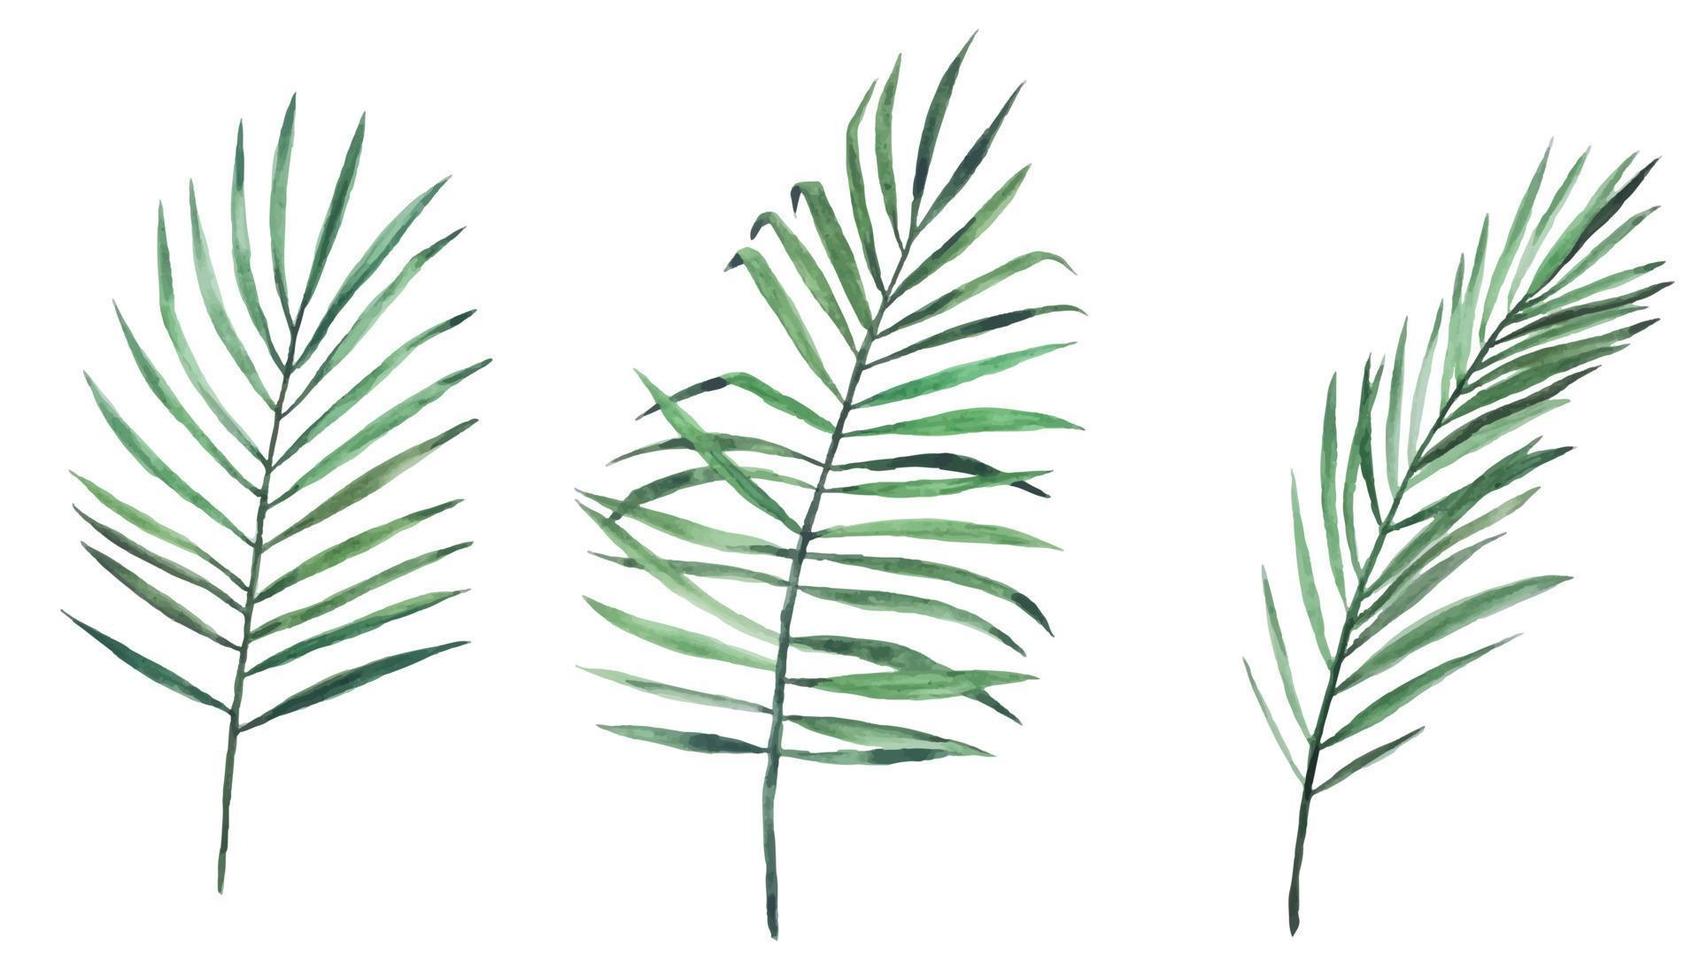 stock illustration. watercolor drawing set of three palm leaves. isolated on white background clipart. leaves of a tropical plant, jungle vector